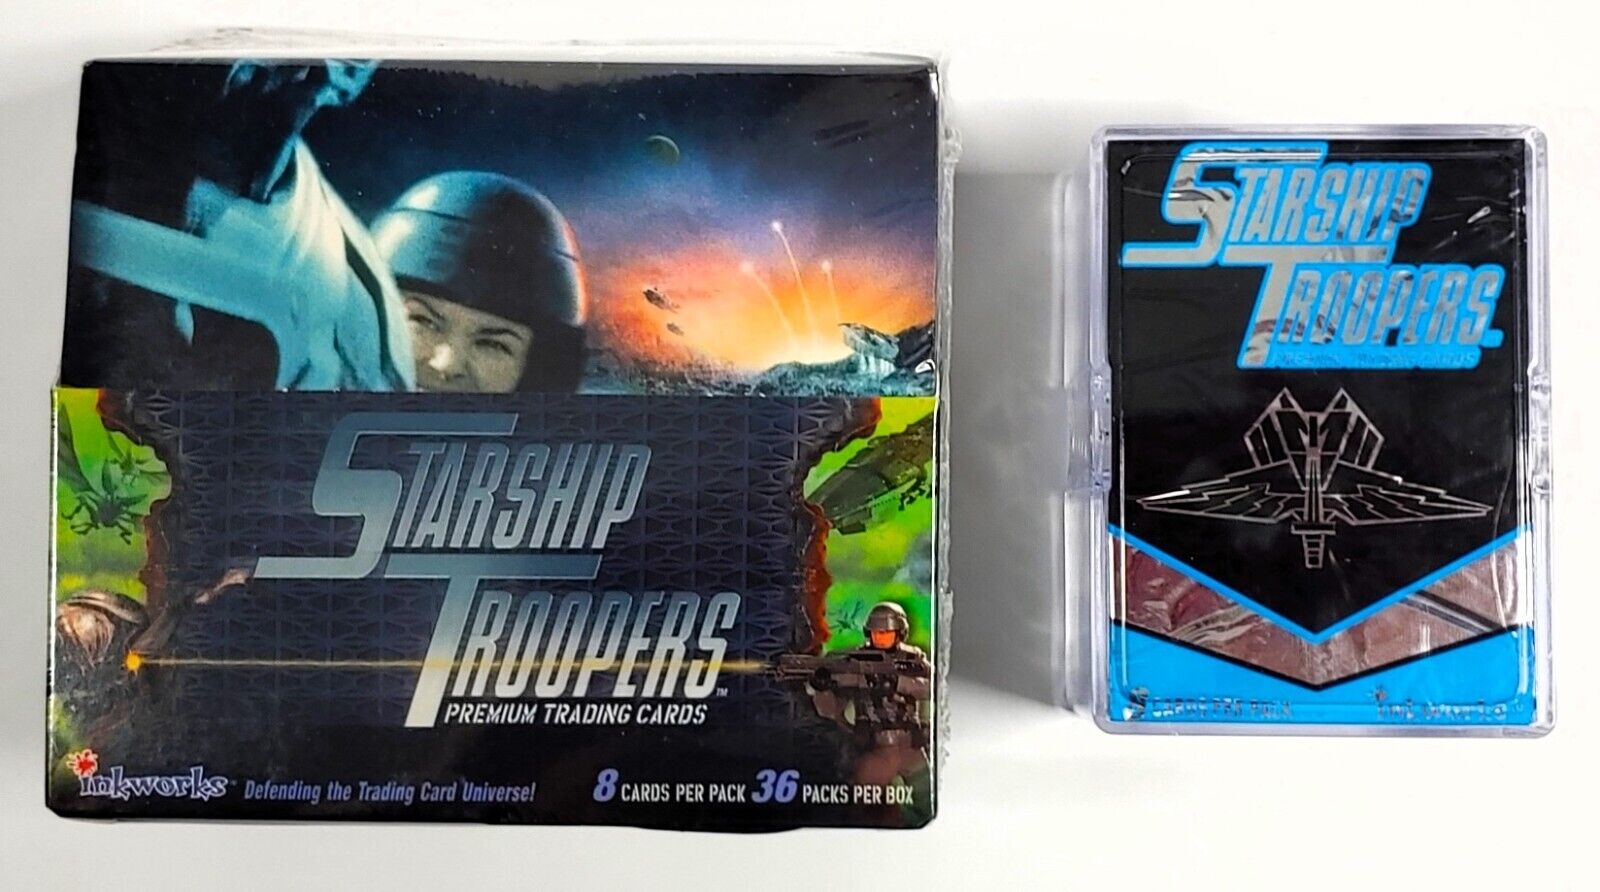 Starship Troopers Movie Full 36 Pack Complete Box + 81 Trading Card Set in Case